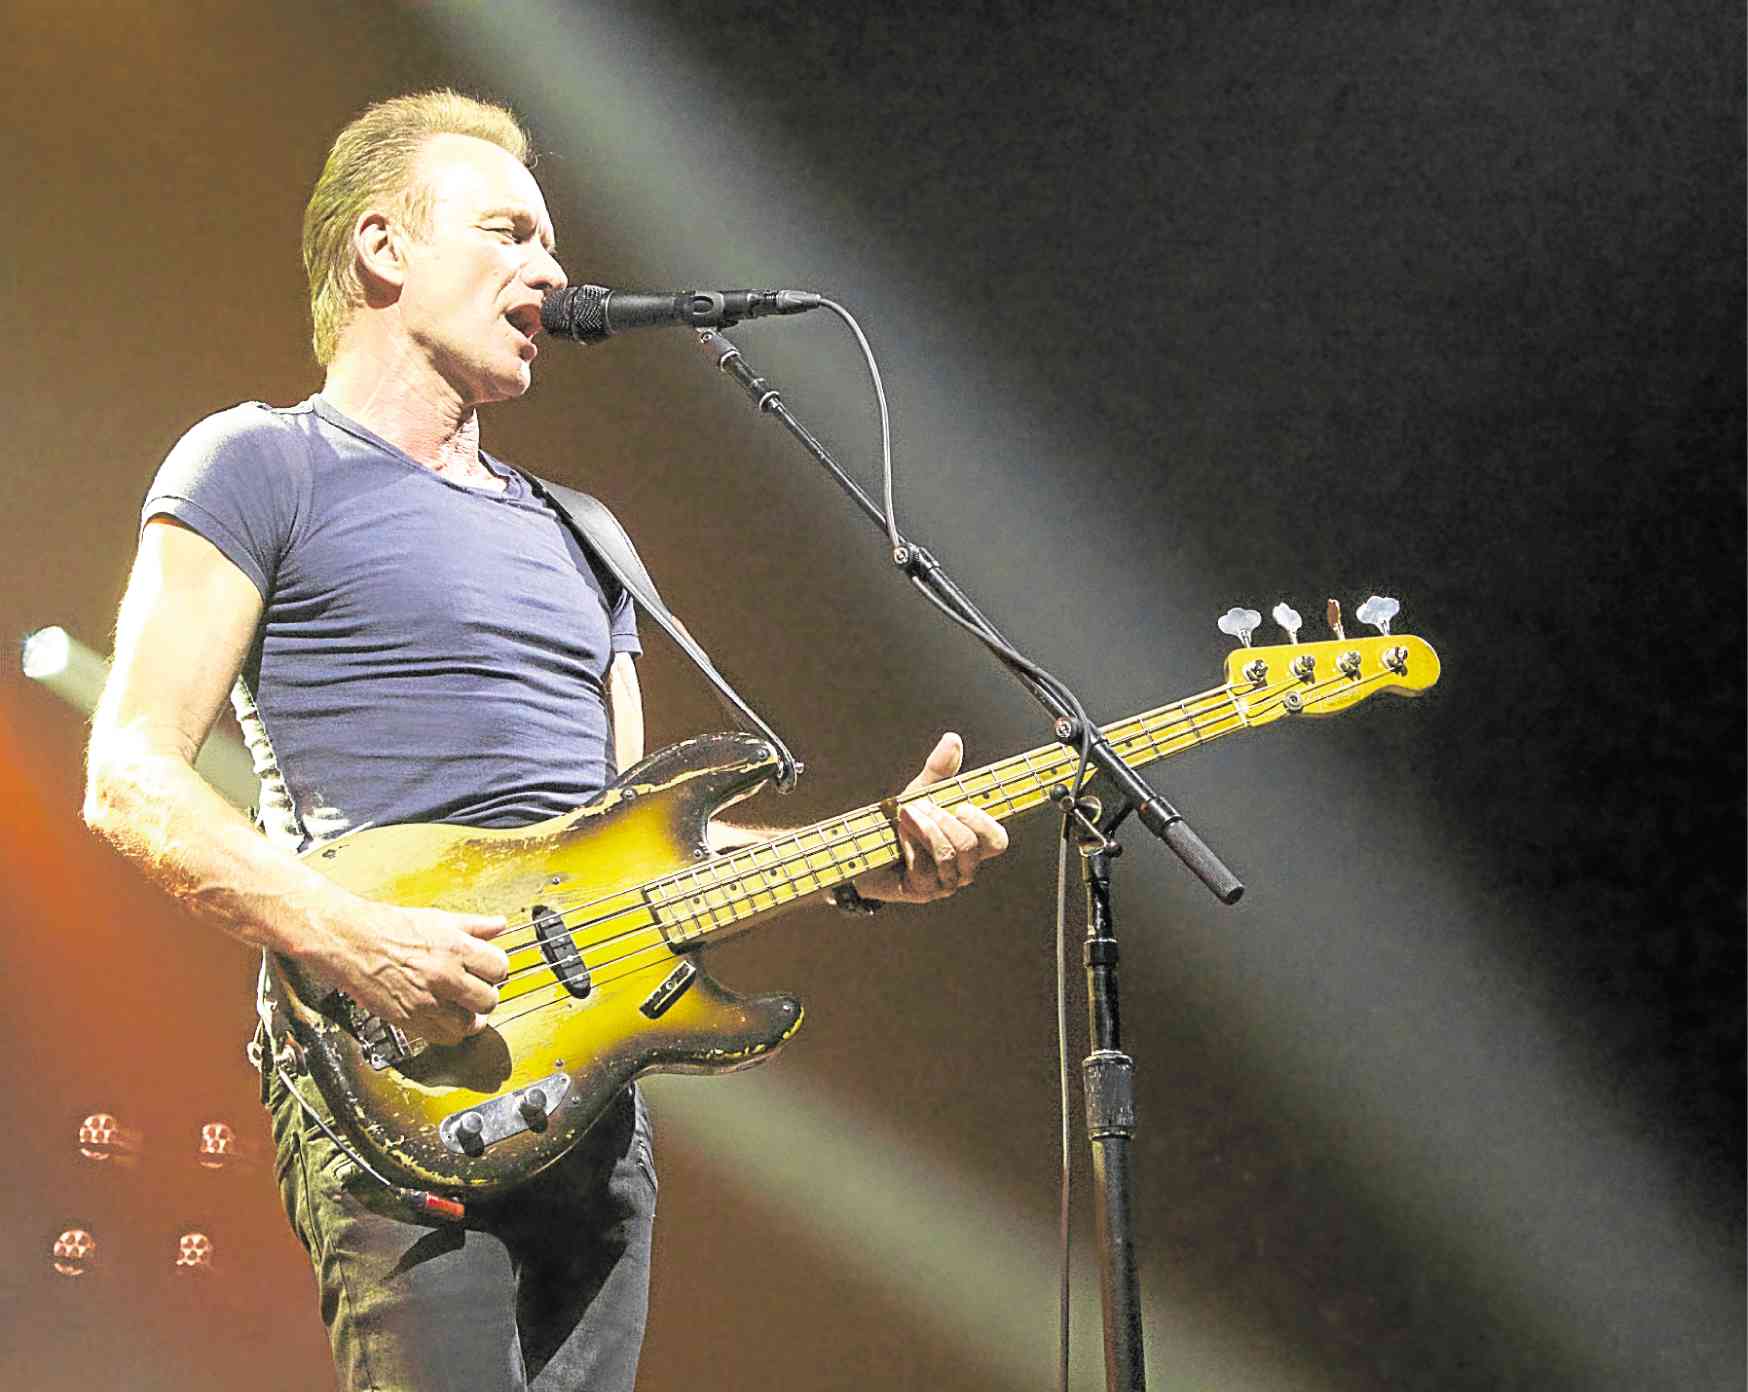 Sting returns to PH on Oct. 2 | Inquirer Entertainment